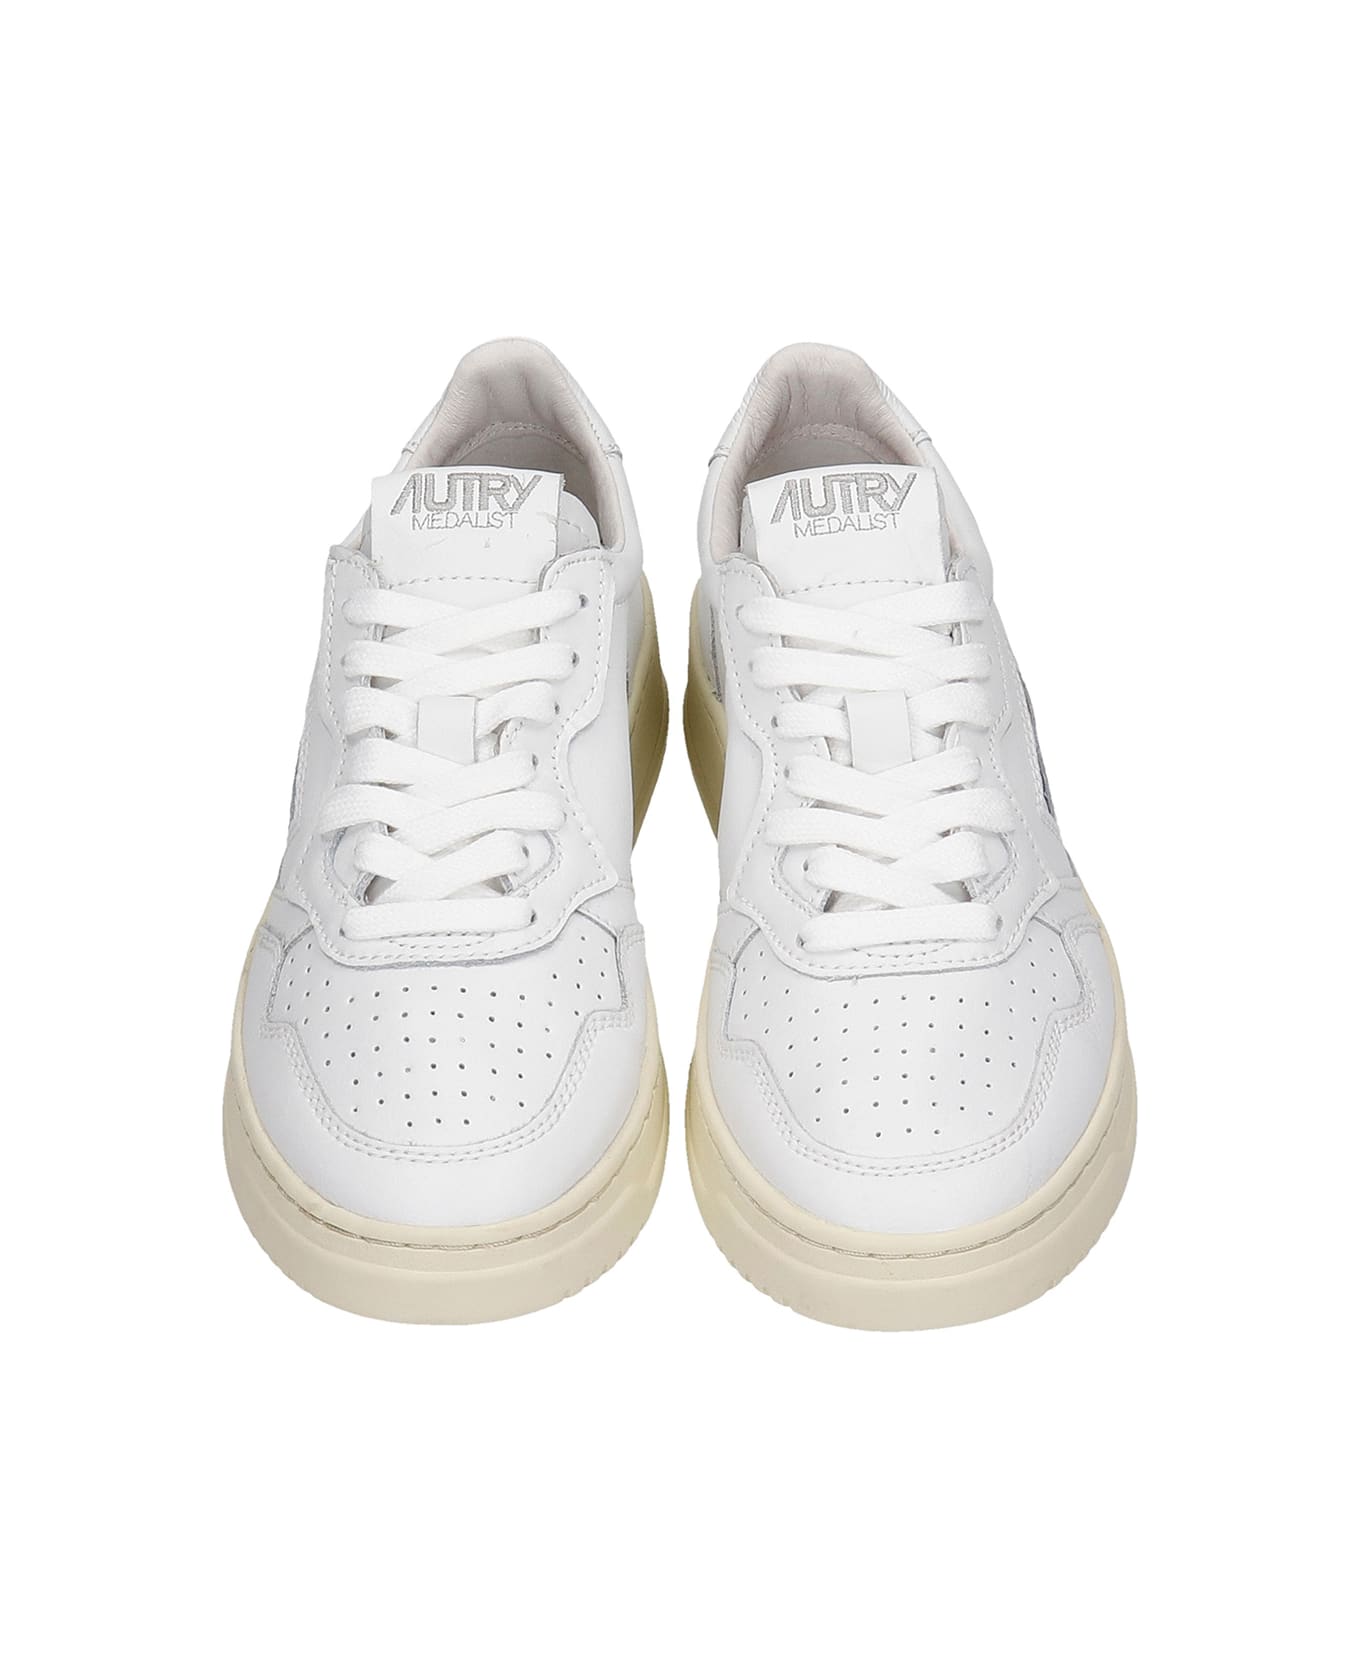 Autry 01 Sneakers In White Leather - WHITE